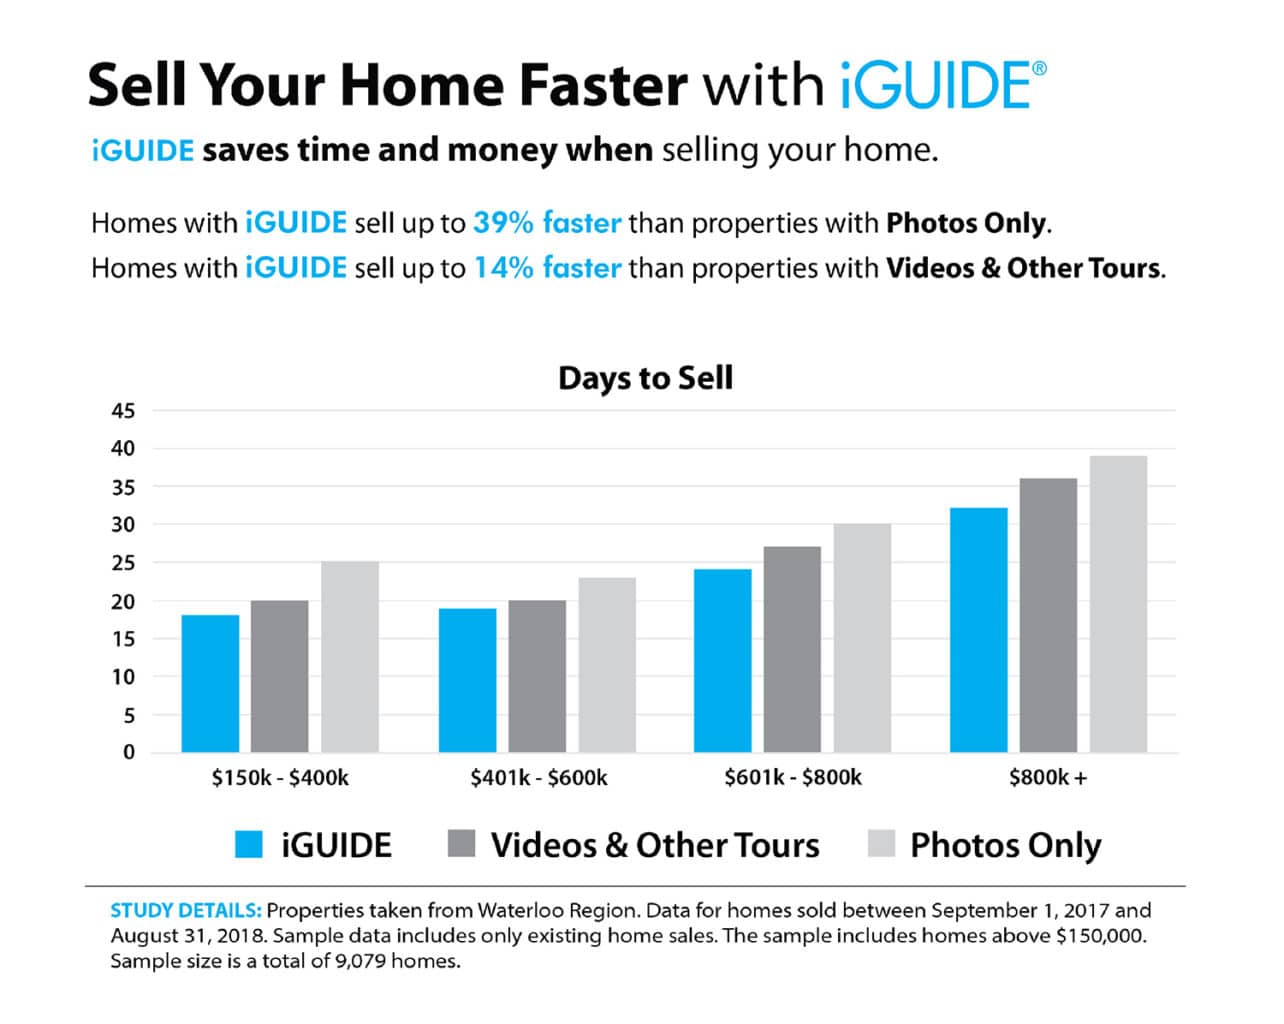 image graph - sell your home faster with iGUIDE